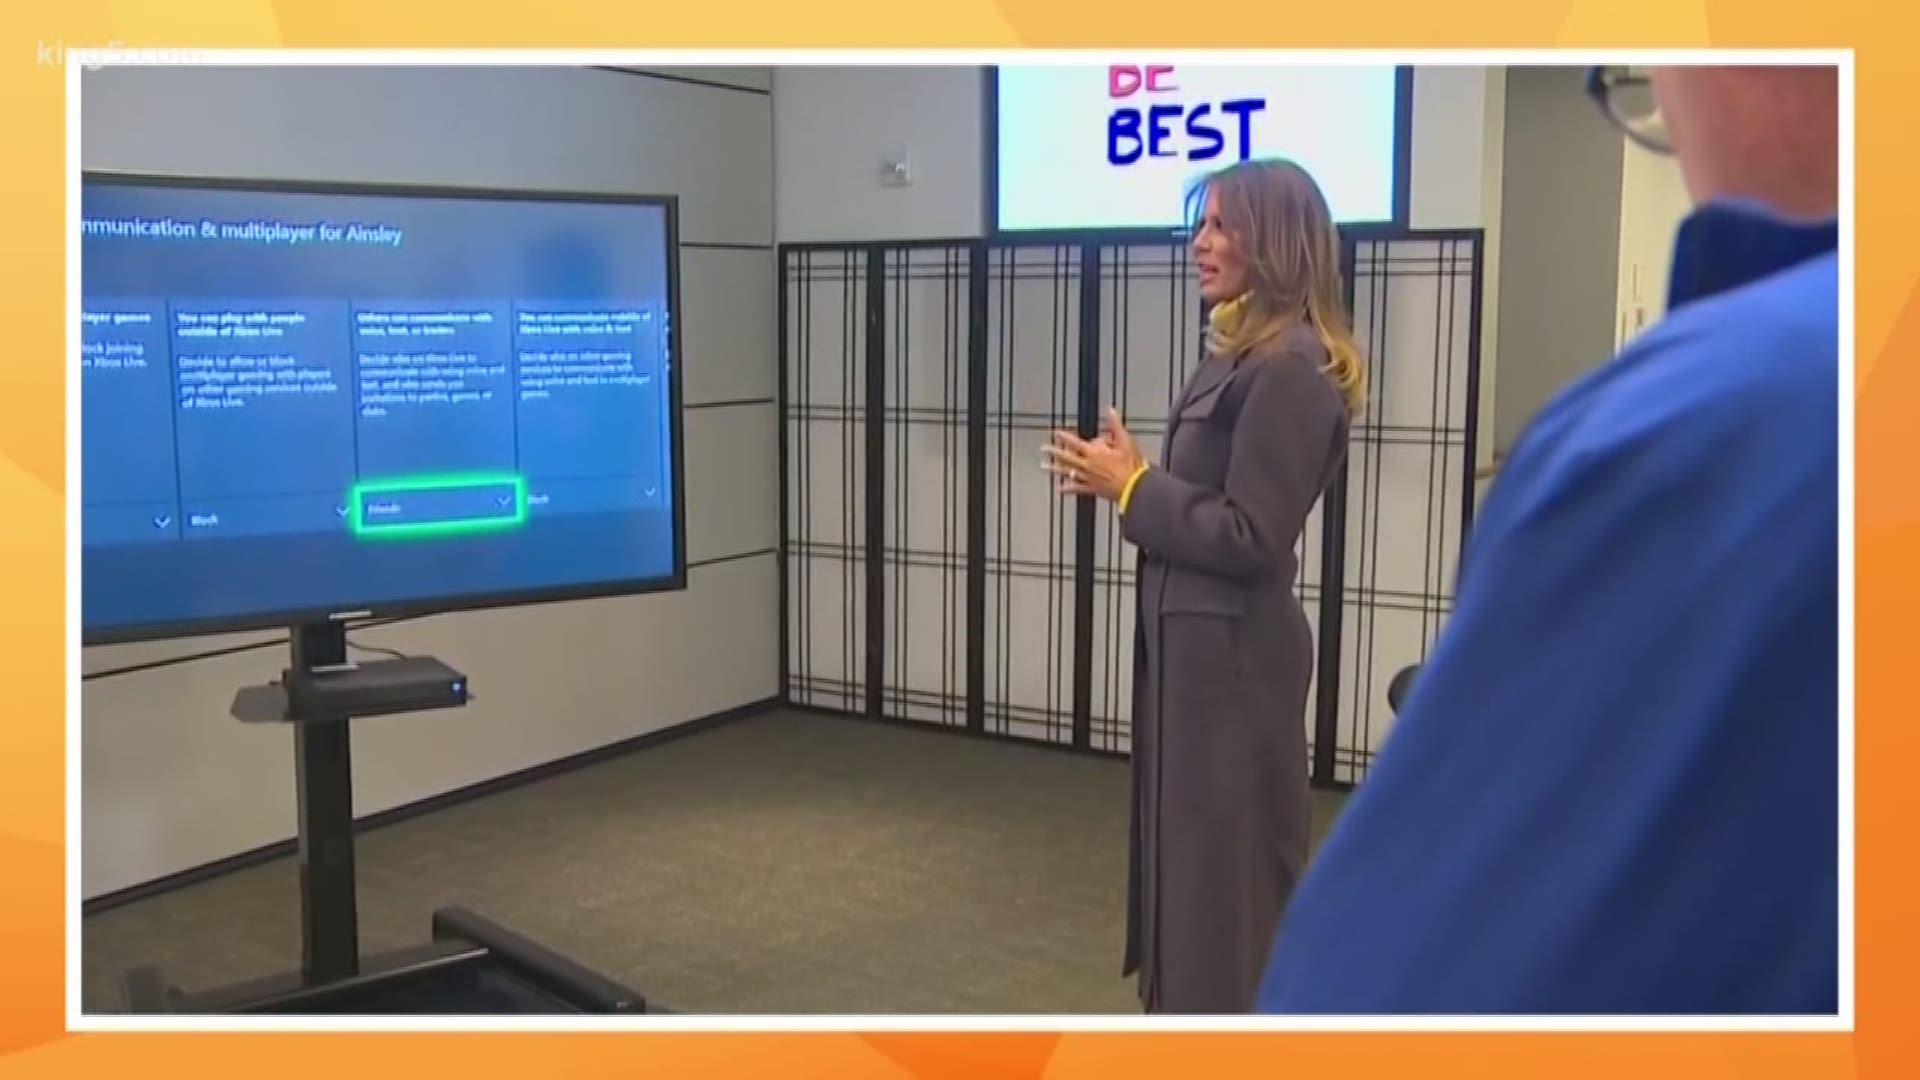 First Lady Melania Trump visited the Redmond headquarters of Microsoft on Monday as part of her 'Be Best' initiative promoting childhood online safety.